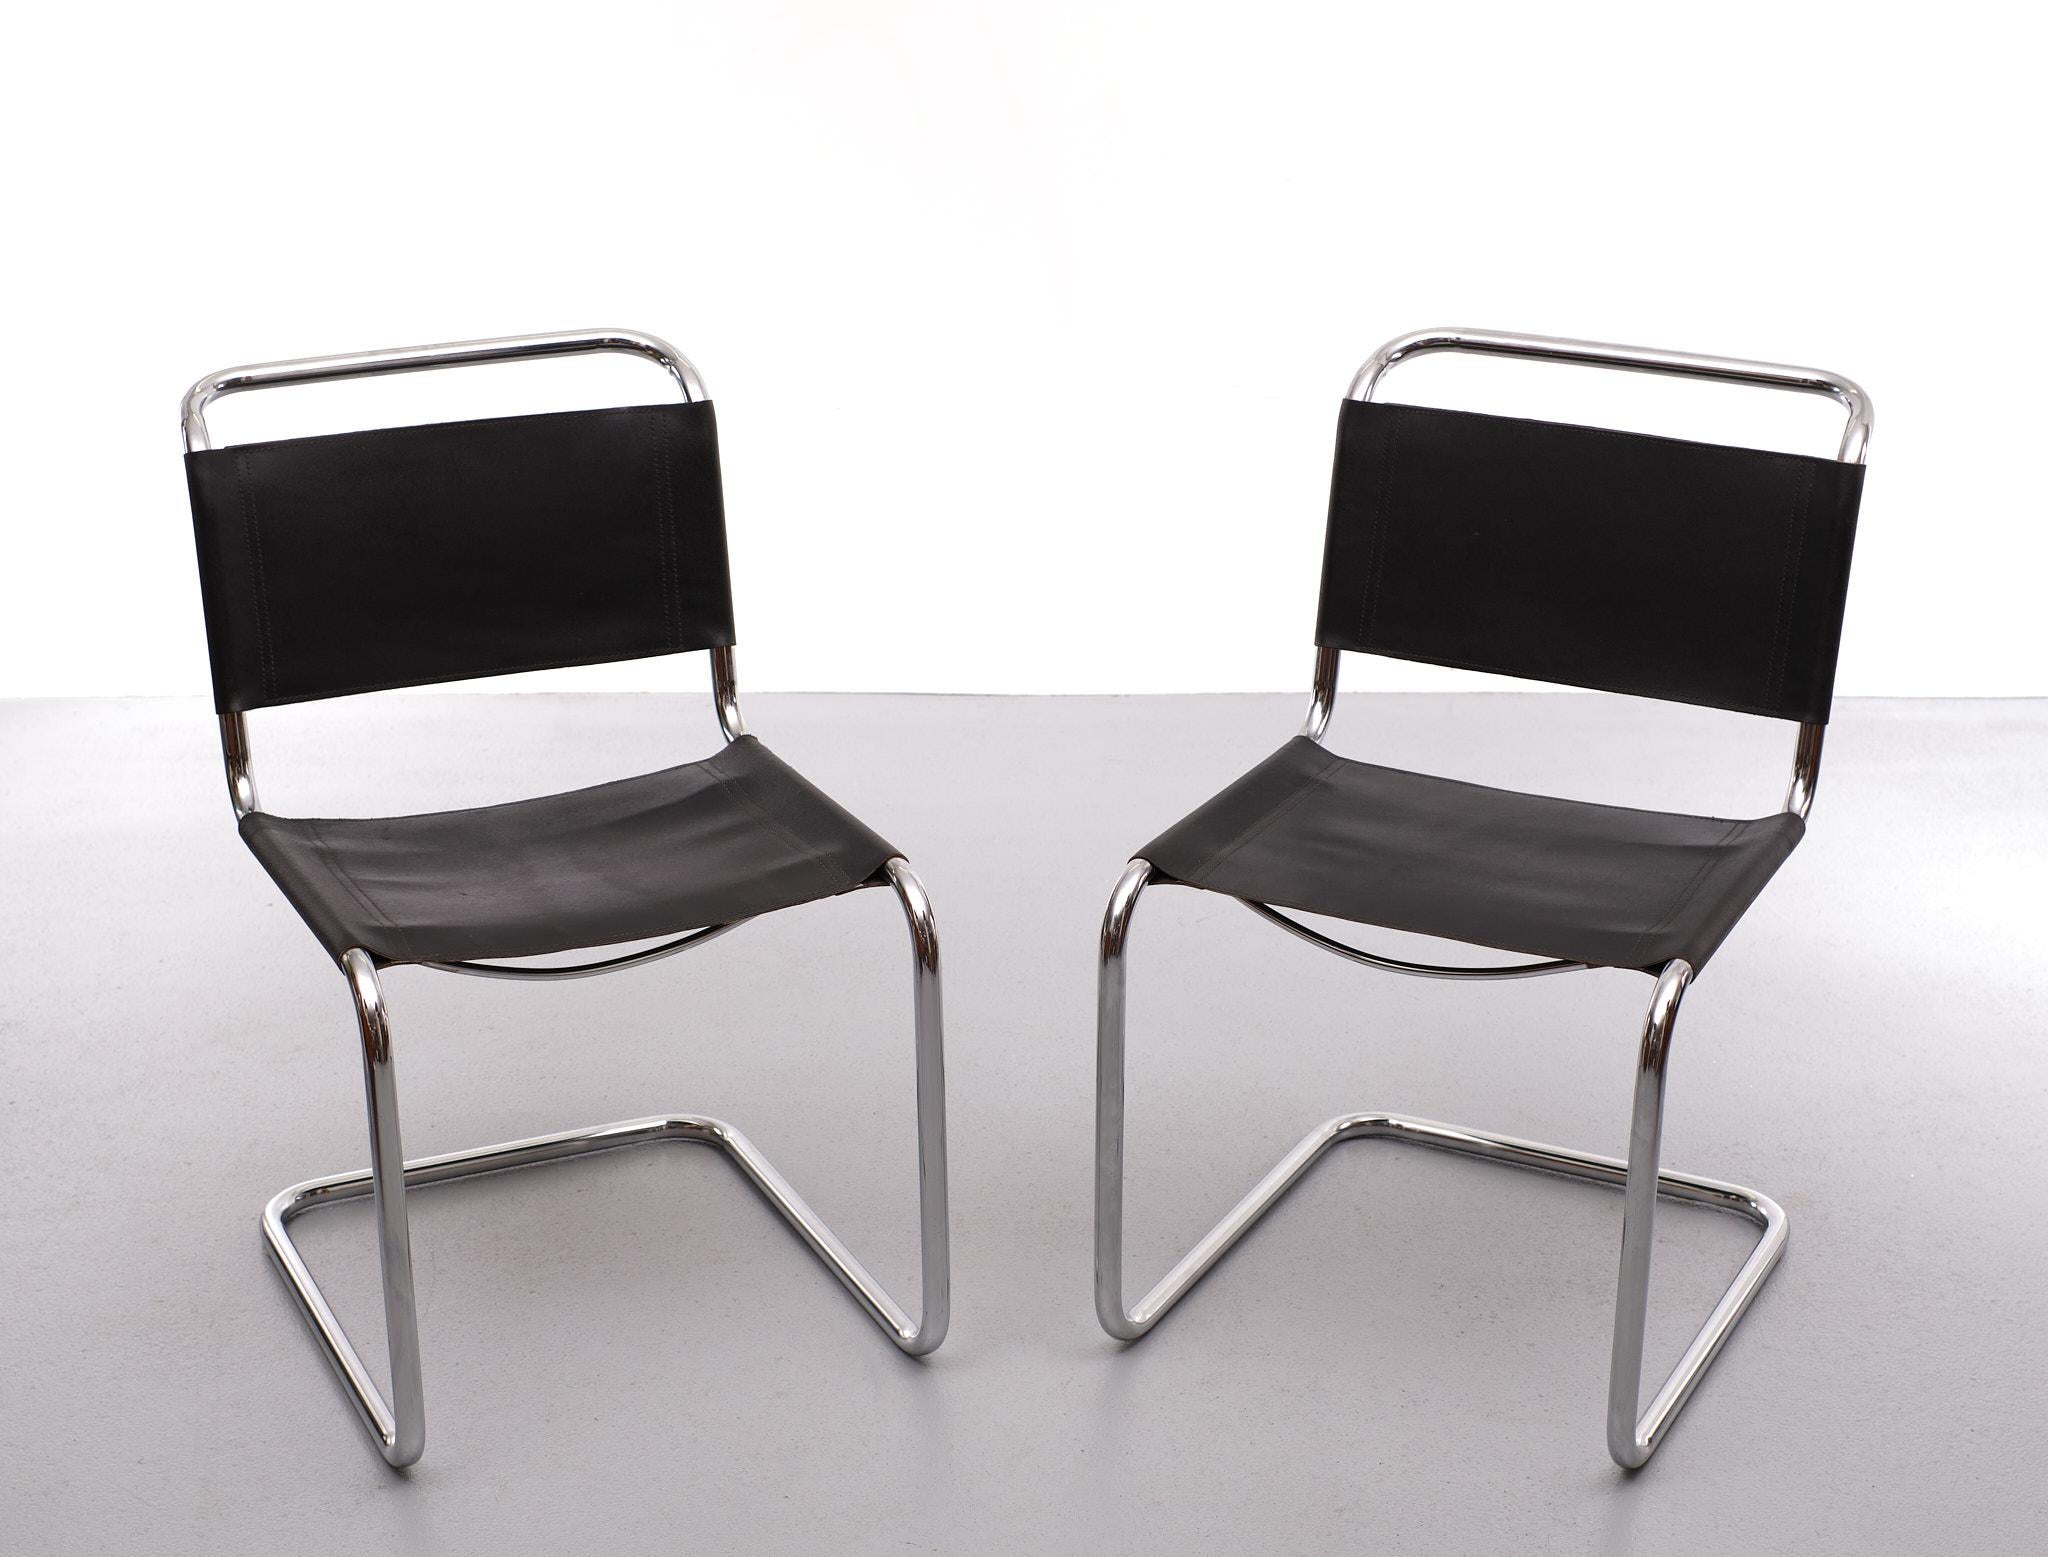 German Vintage S33 Mart Stam Cantilever Chairs 1970s